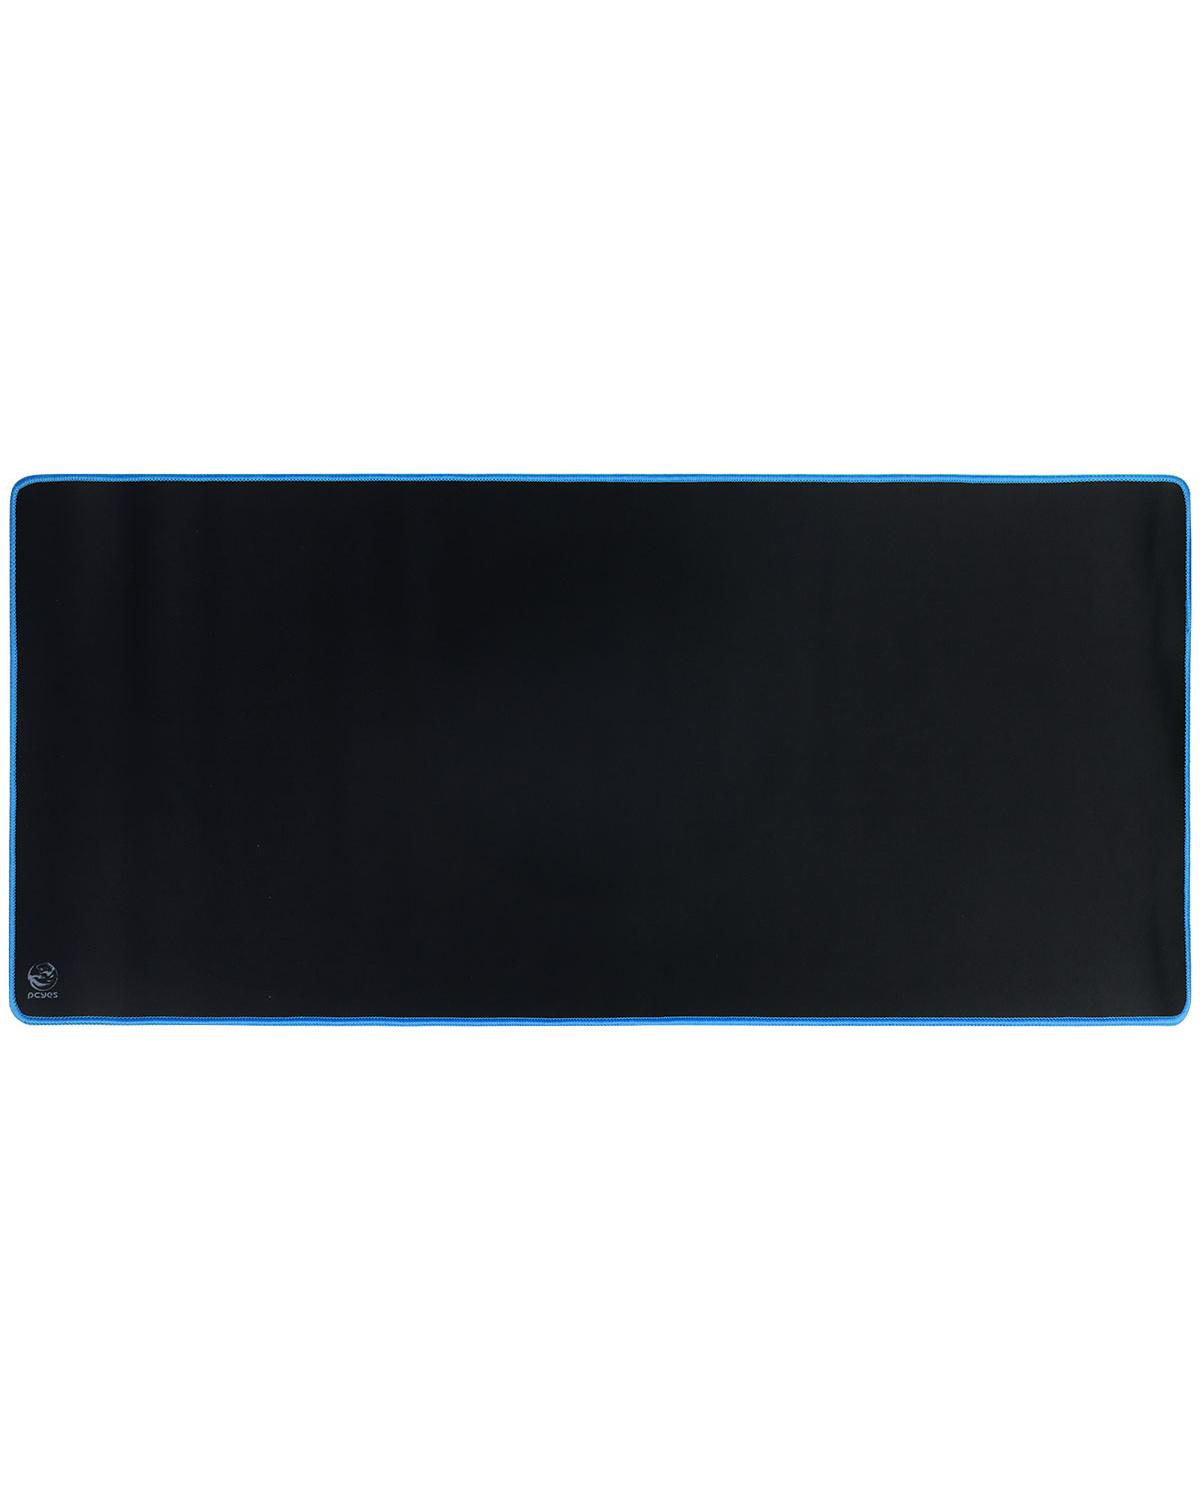 MOUSE PAD COLORS BLUE EXTENDED - ESTILO SPEED AZUL - 900X420MM - PMC90X42BE